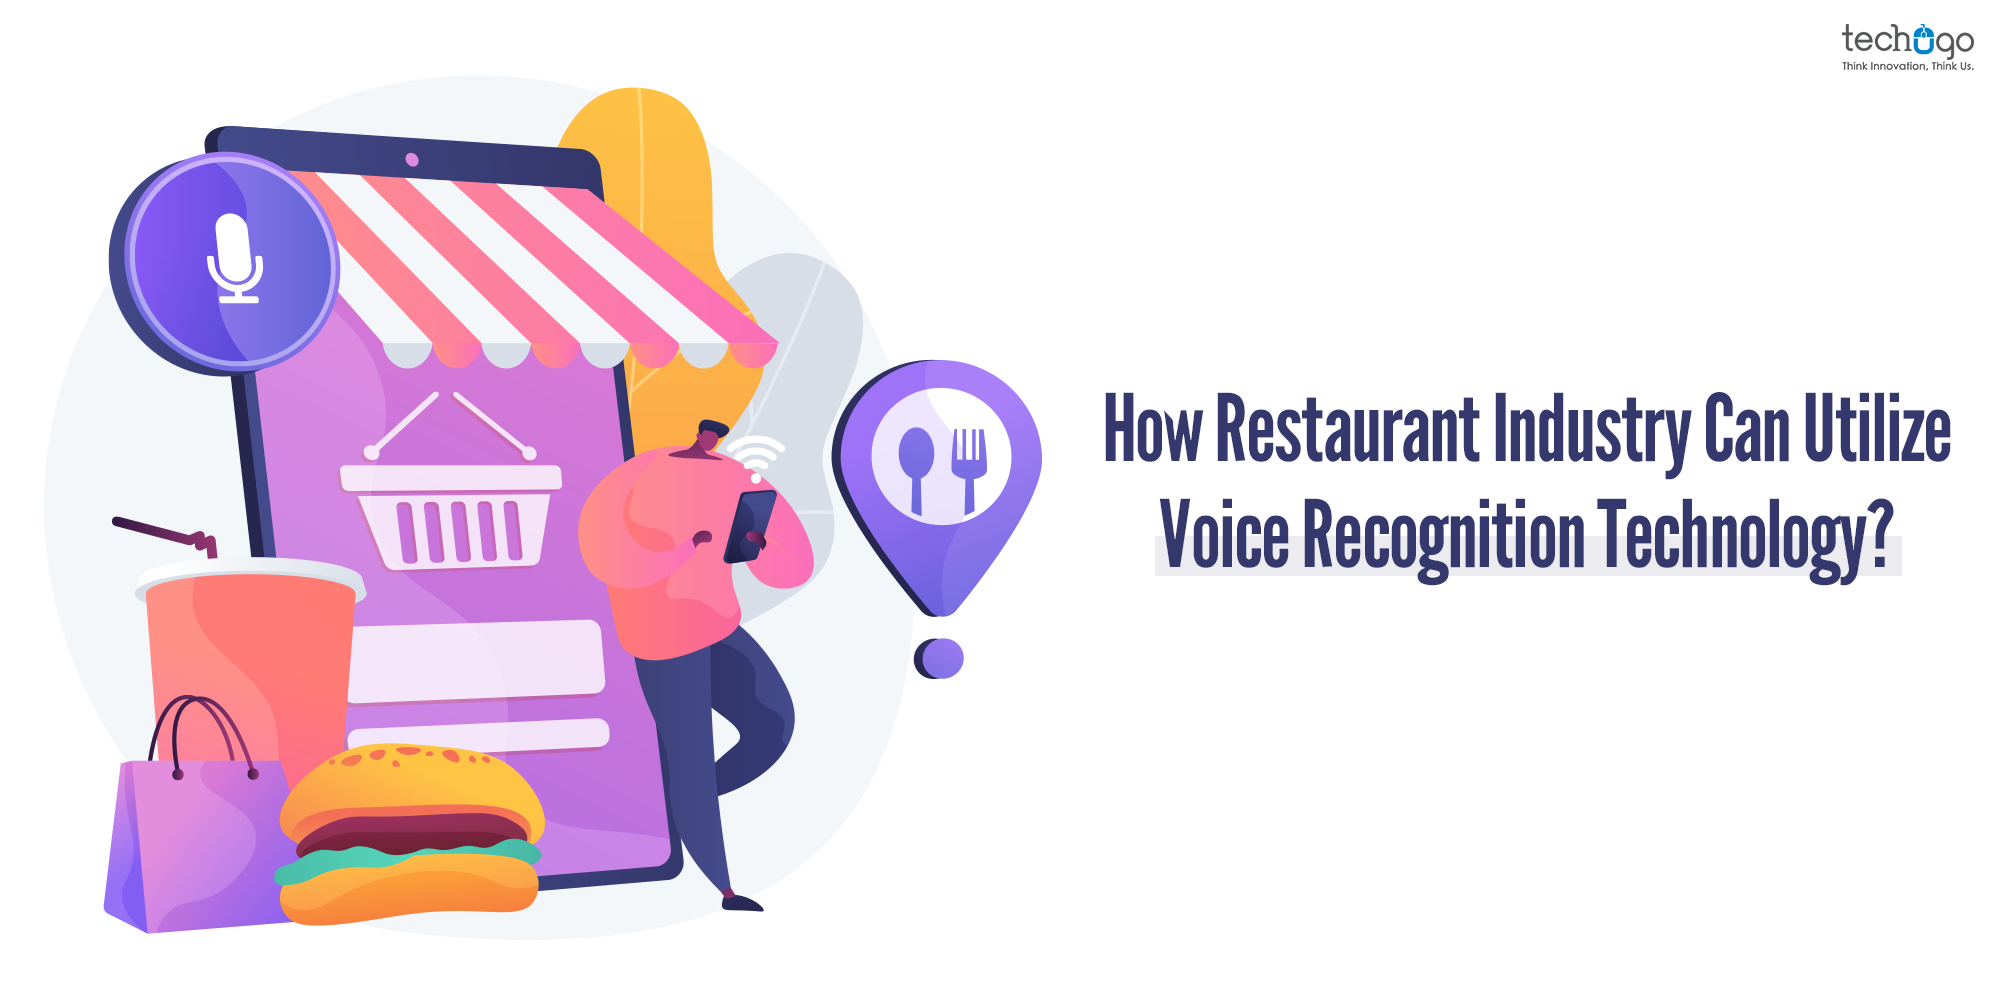 How Restaurant Industry Can Utilize Voice Recognition Technology?